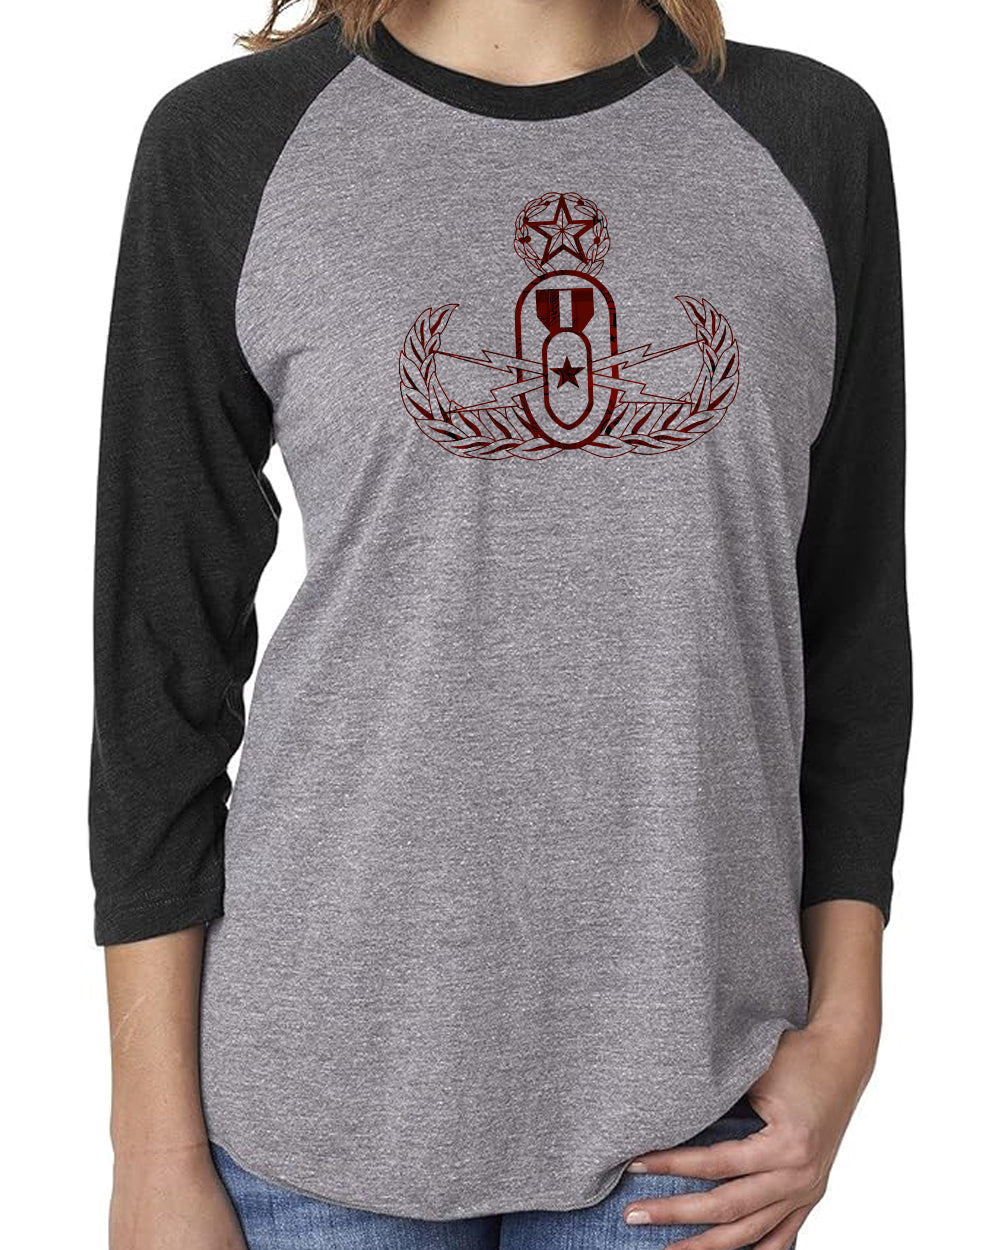 A woman modeling a grey and black raglan  3/4 sleeve tee with a red and black plaid EOD Master Badge printed on the front